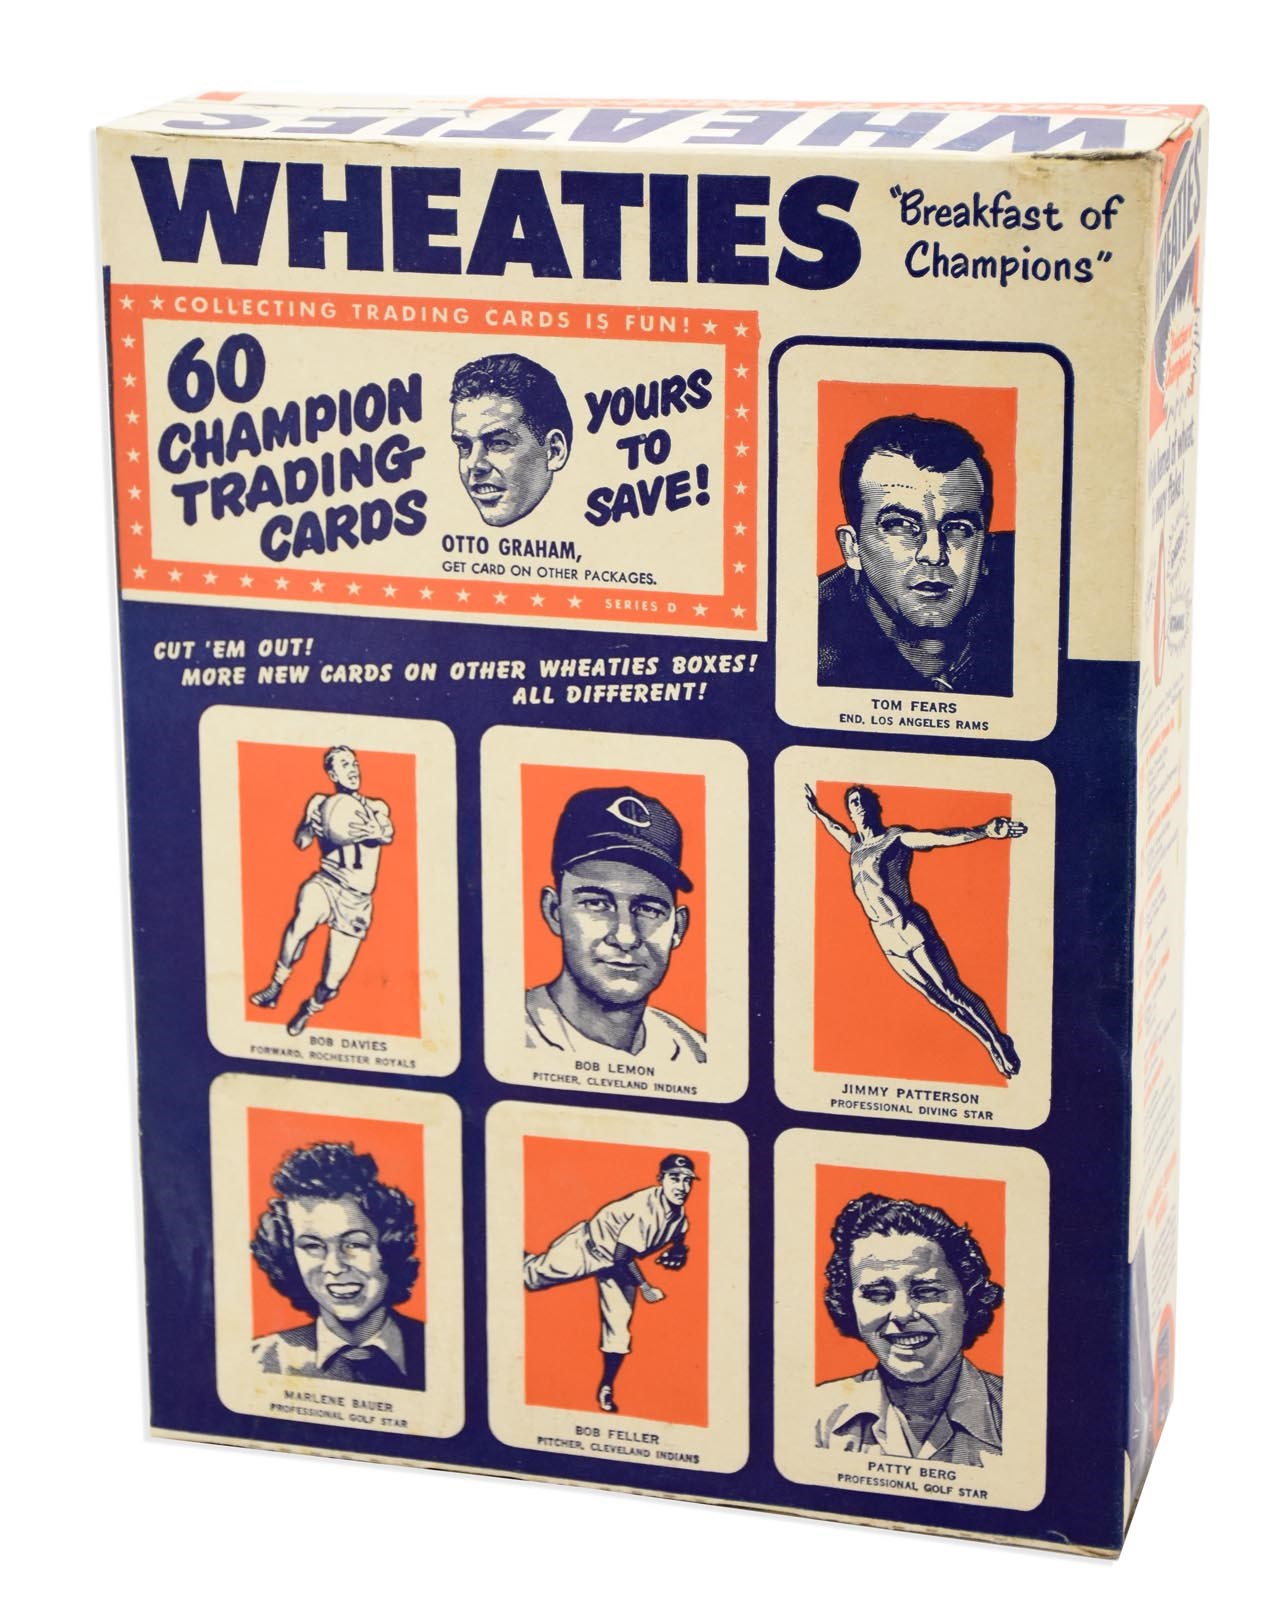 Baseball and Trading Cards - Circa 1950's Wheaties Box with George Mikan